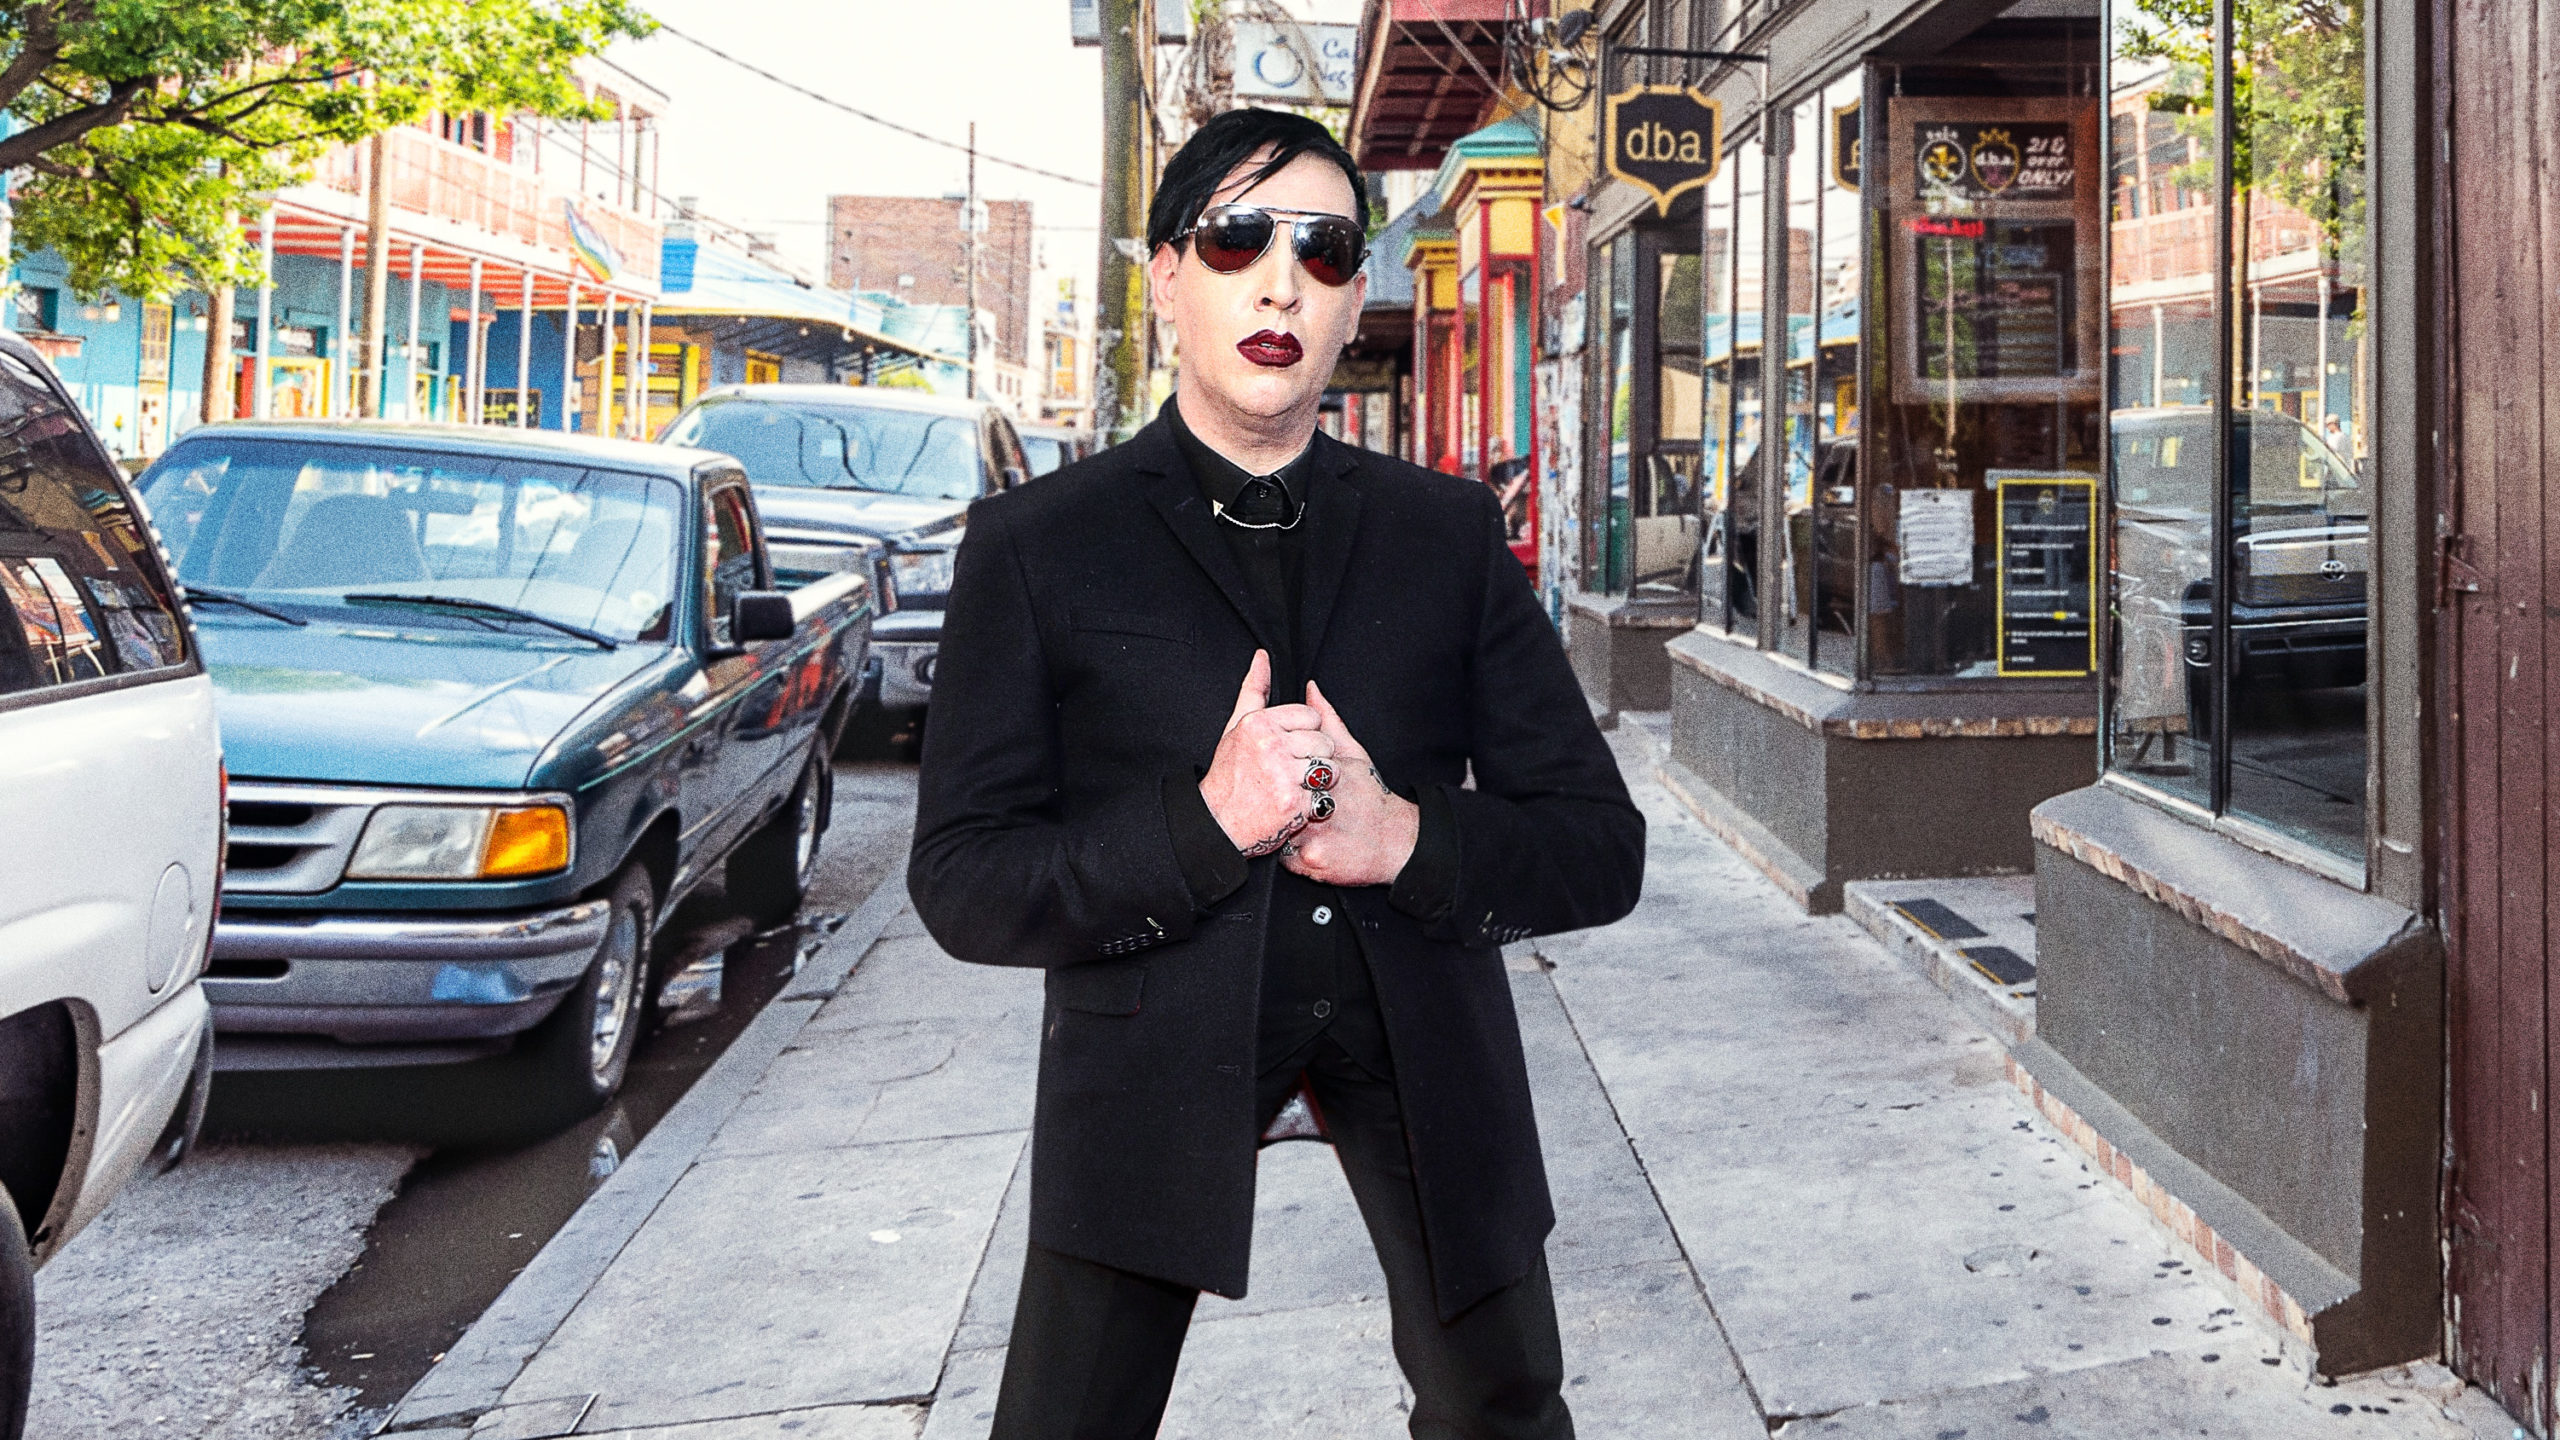 Marilyn Manson Ribs The True Story Behind What He Did And 7 More Shocking Facts